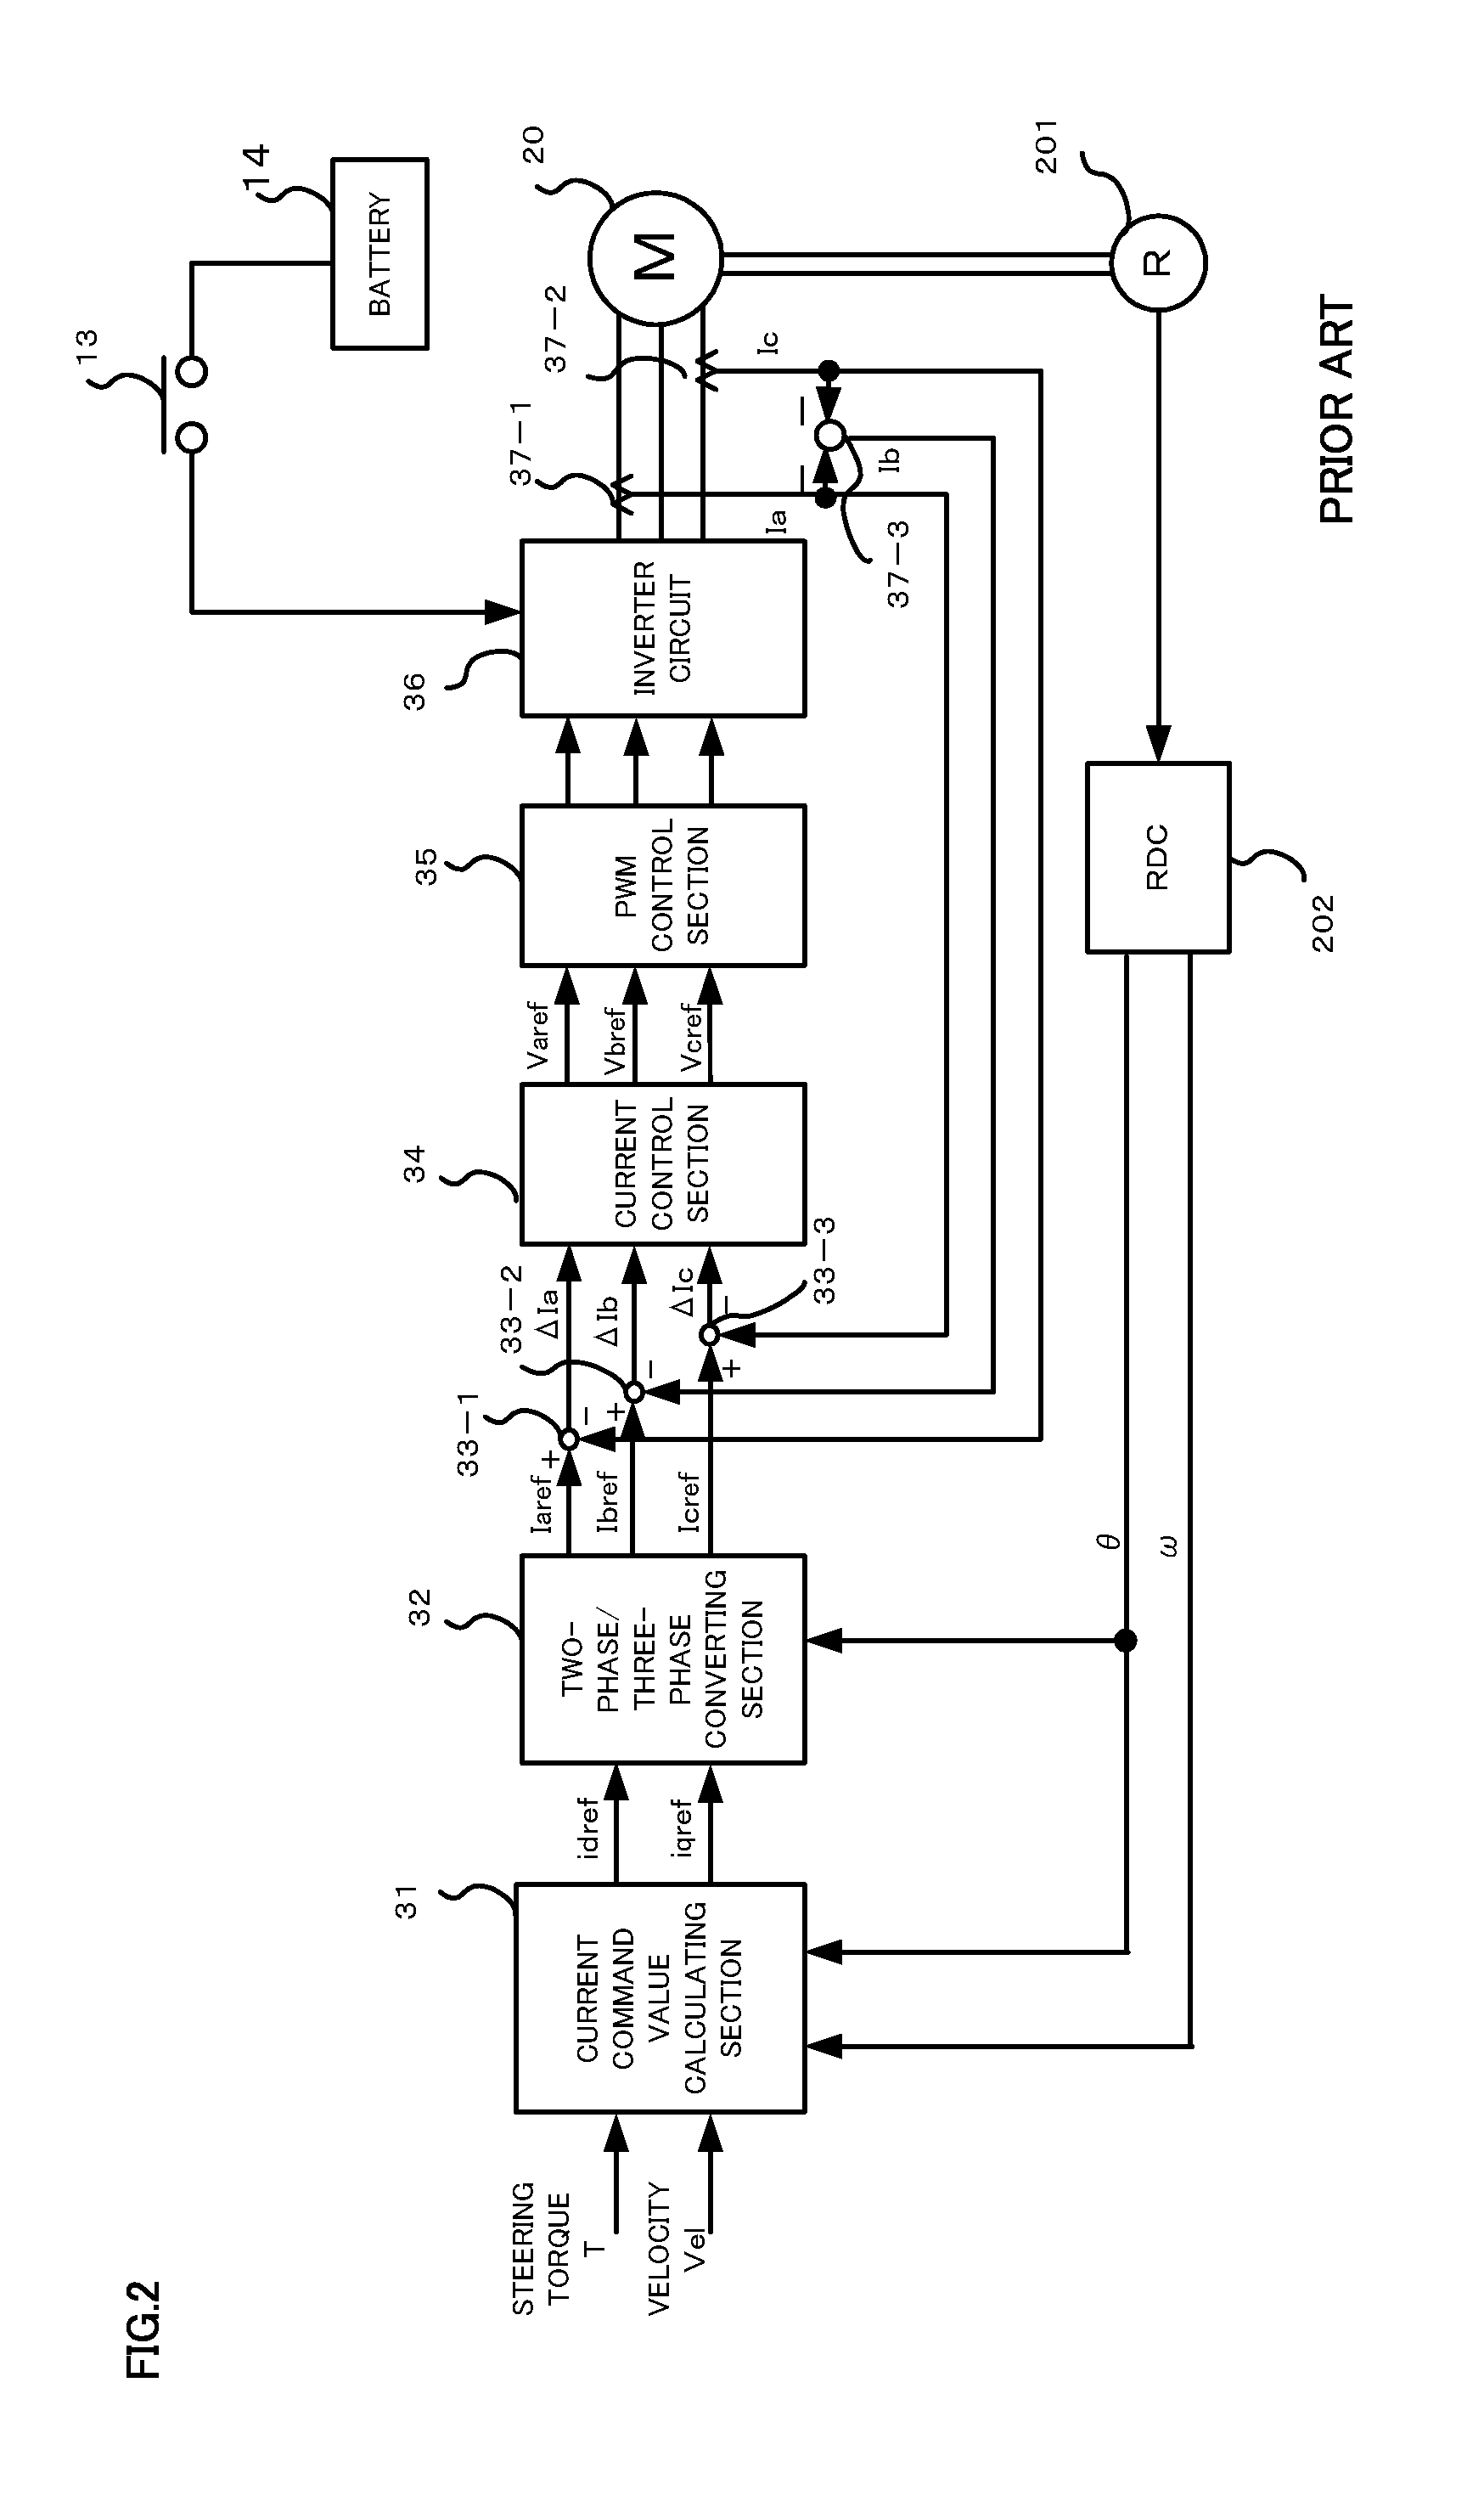 Power state diagnosis method and apparatus